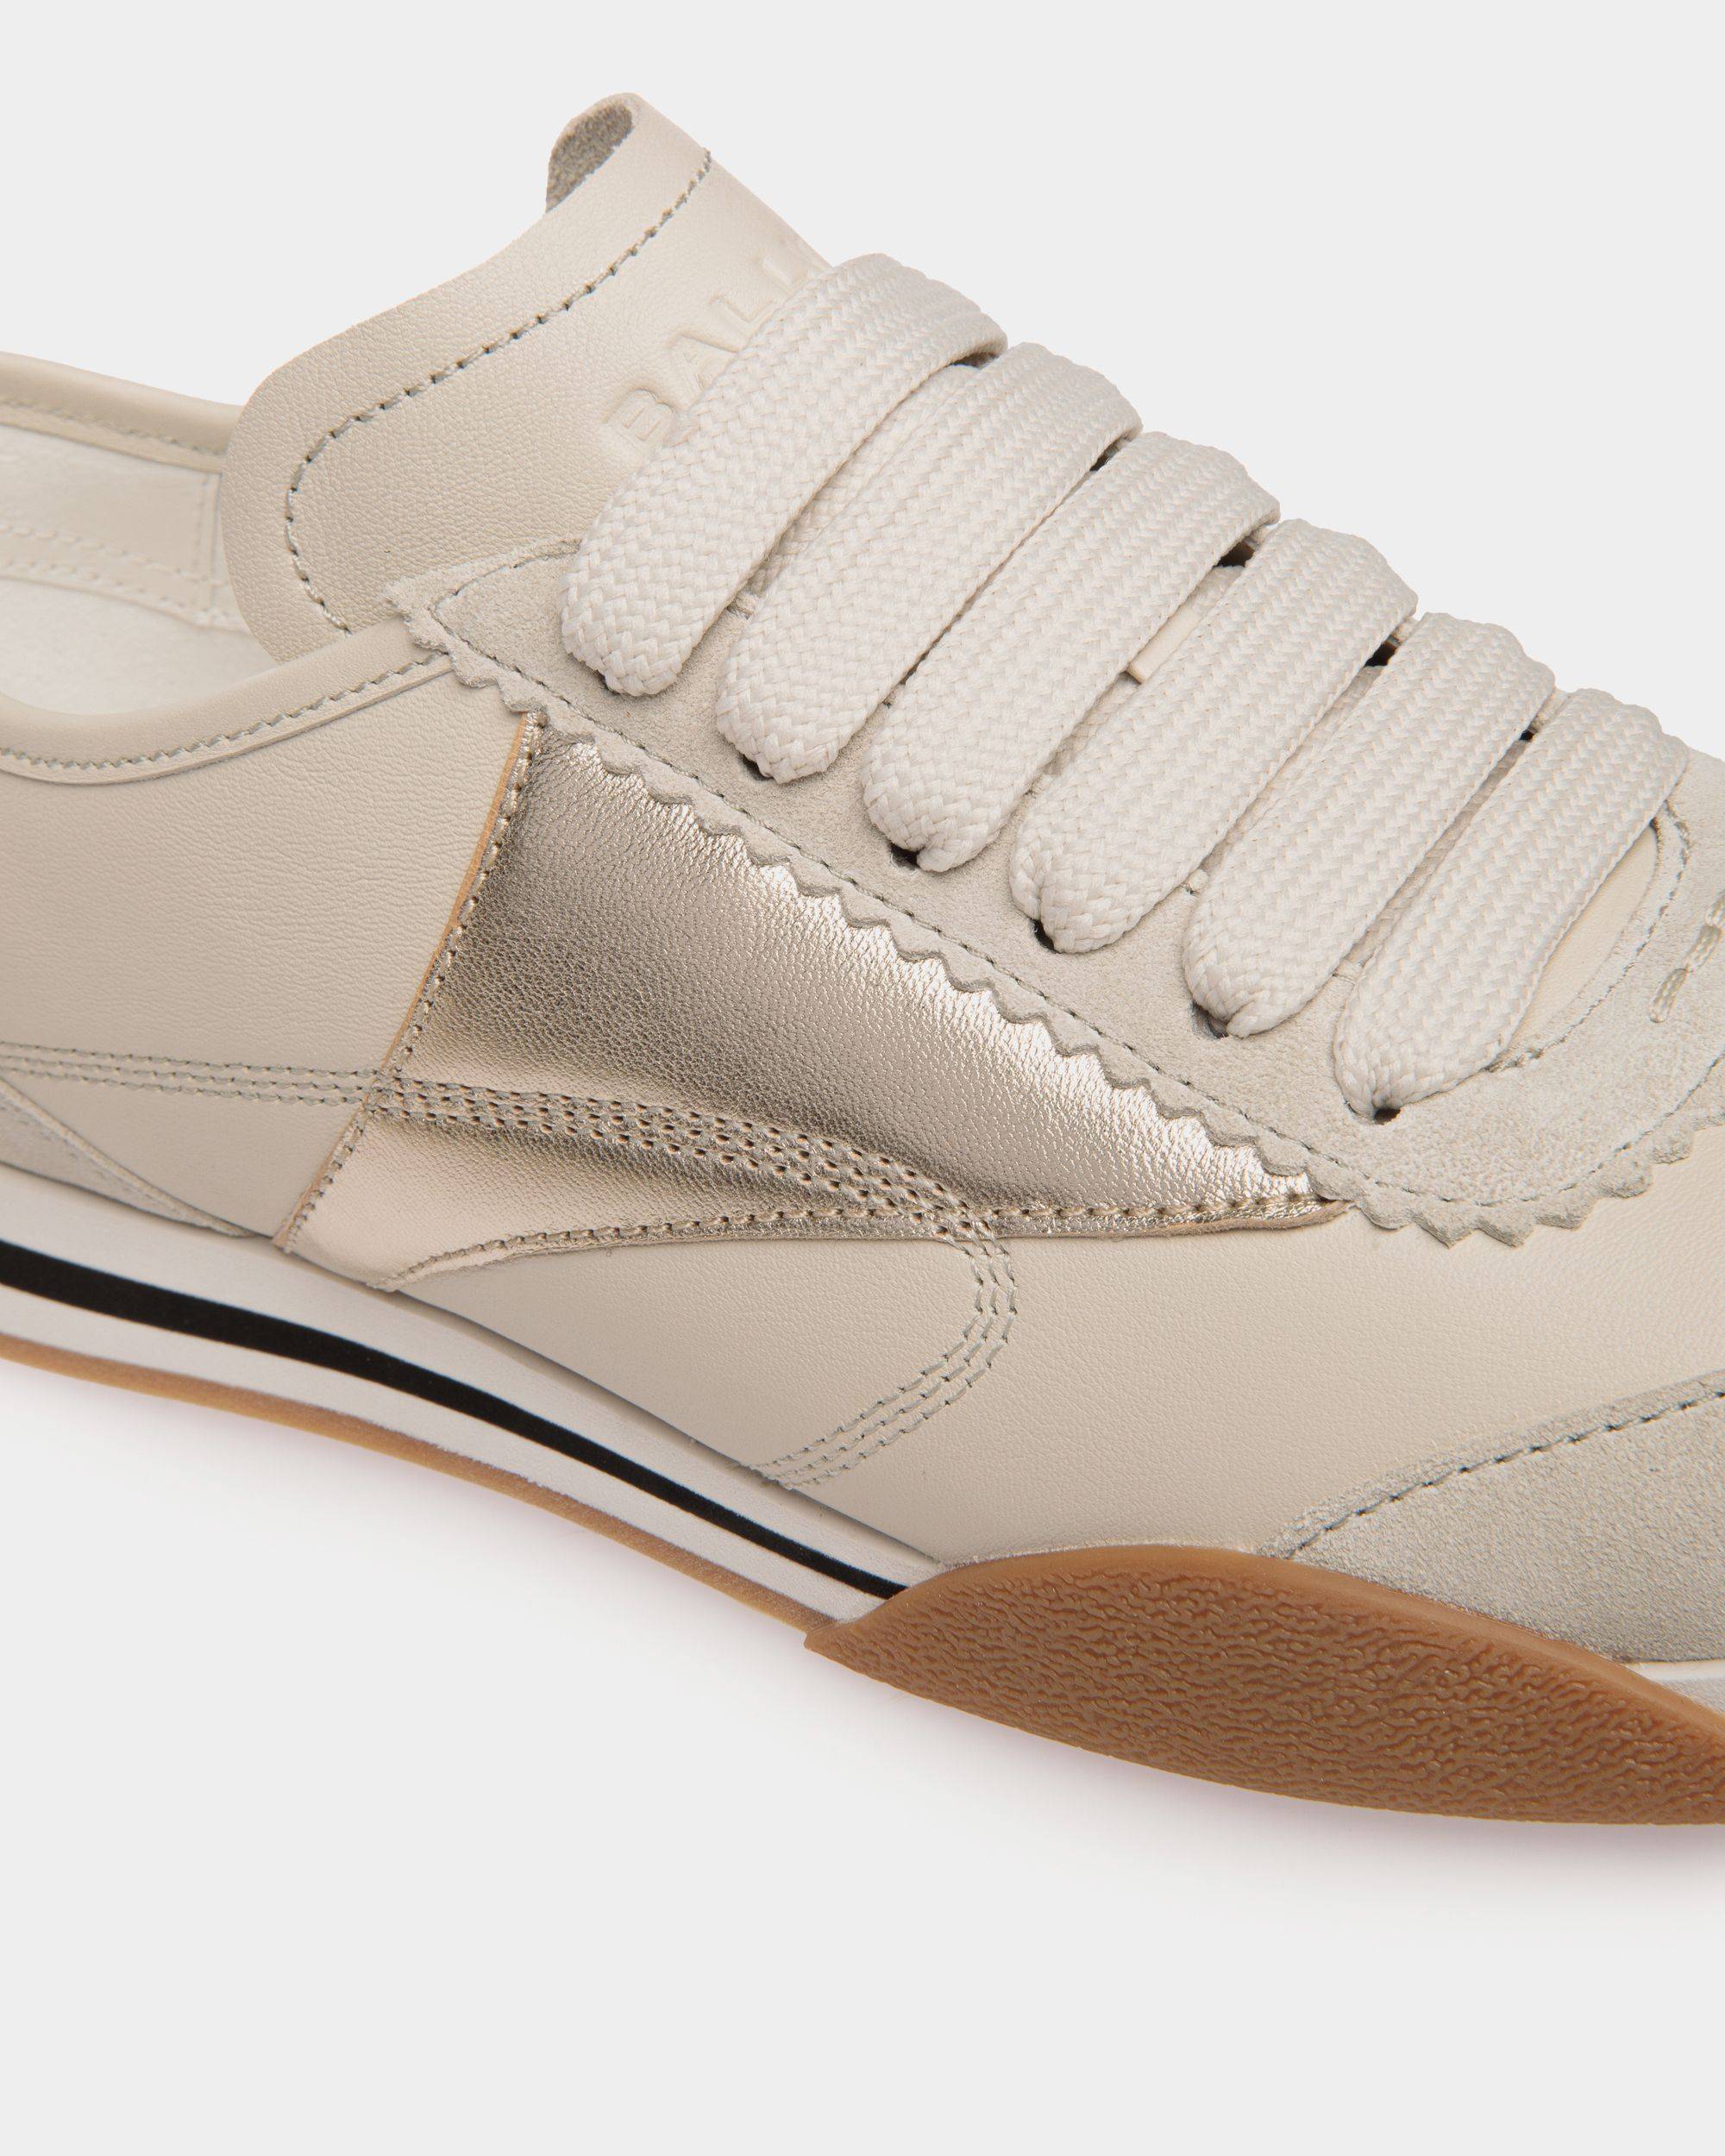 Sussex Sneaker In White And Gold Leather - Women's - Bally - 05